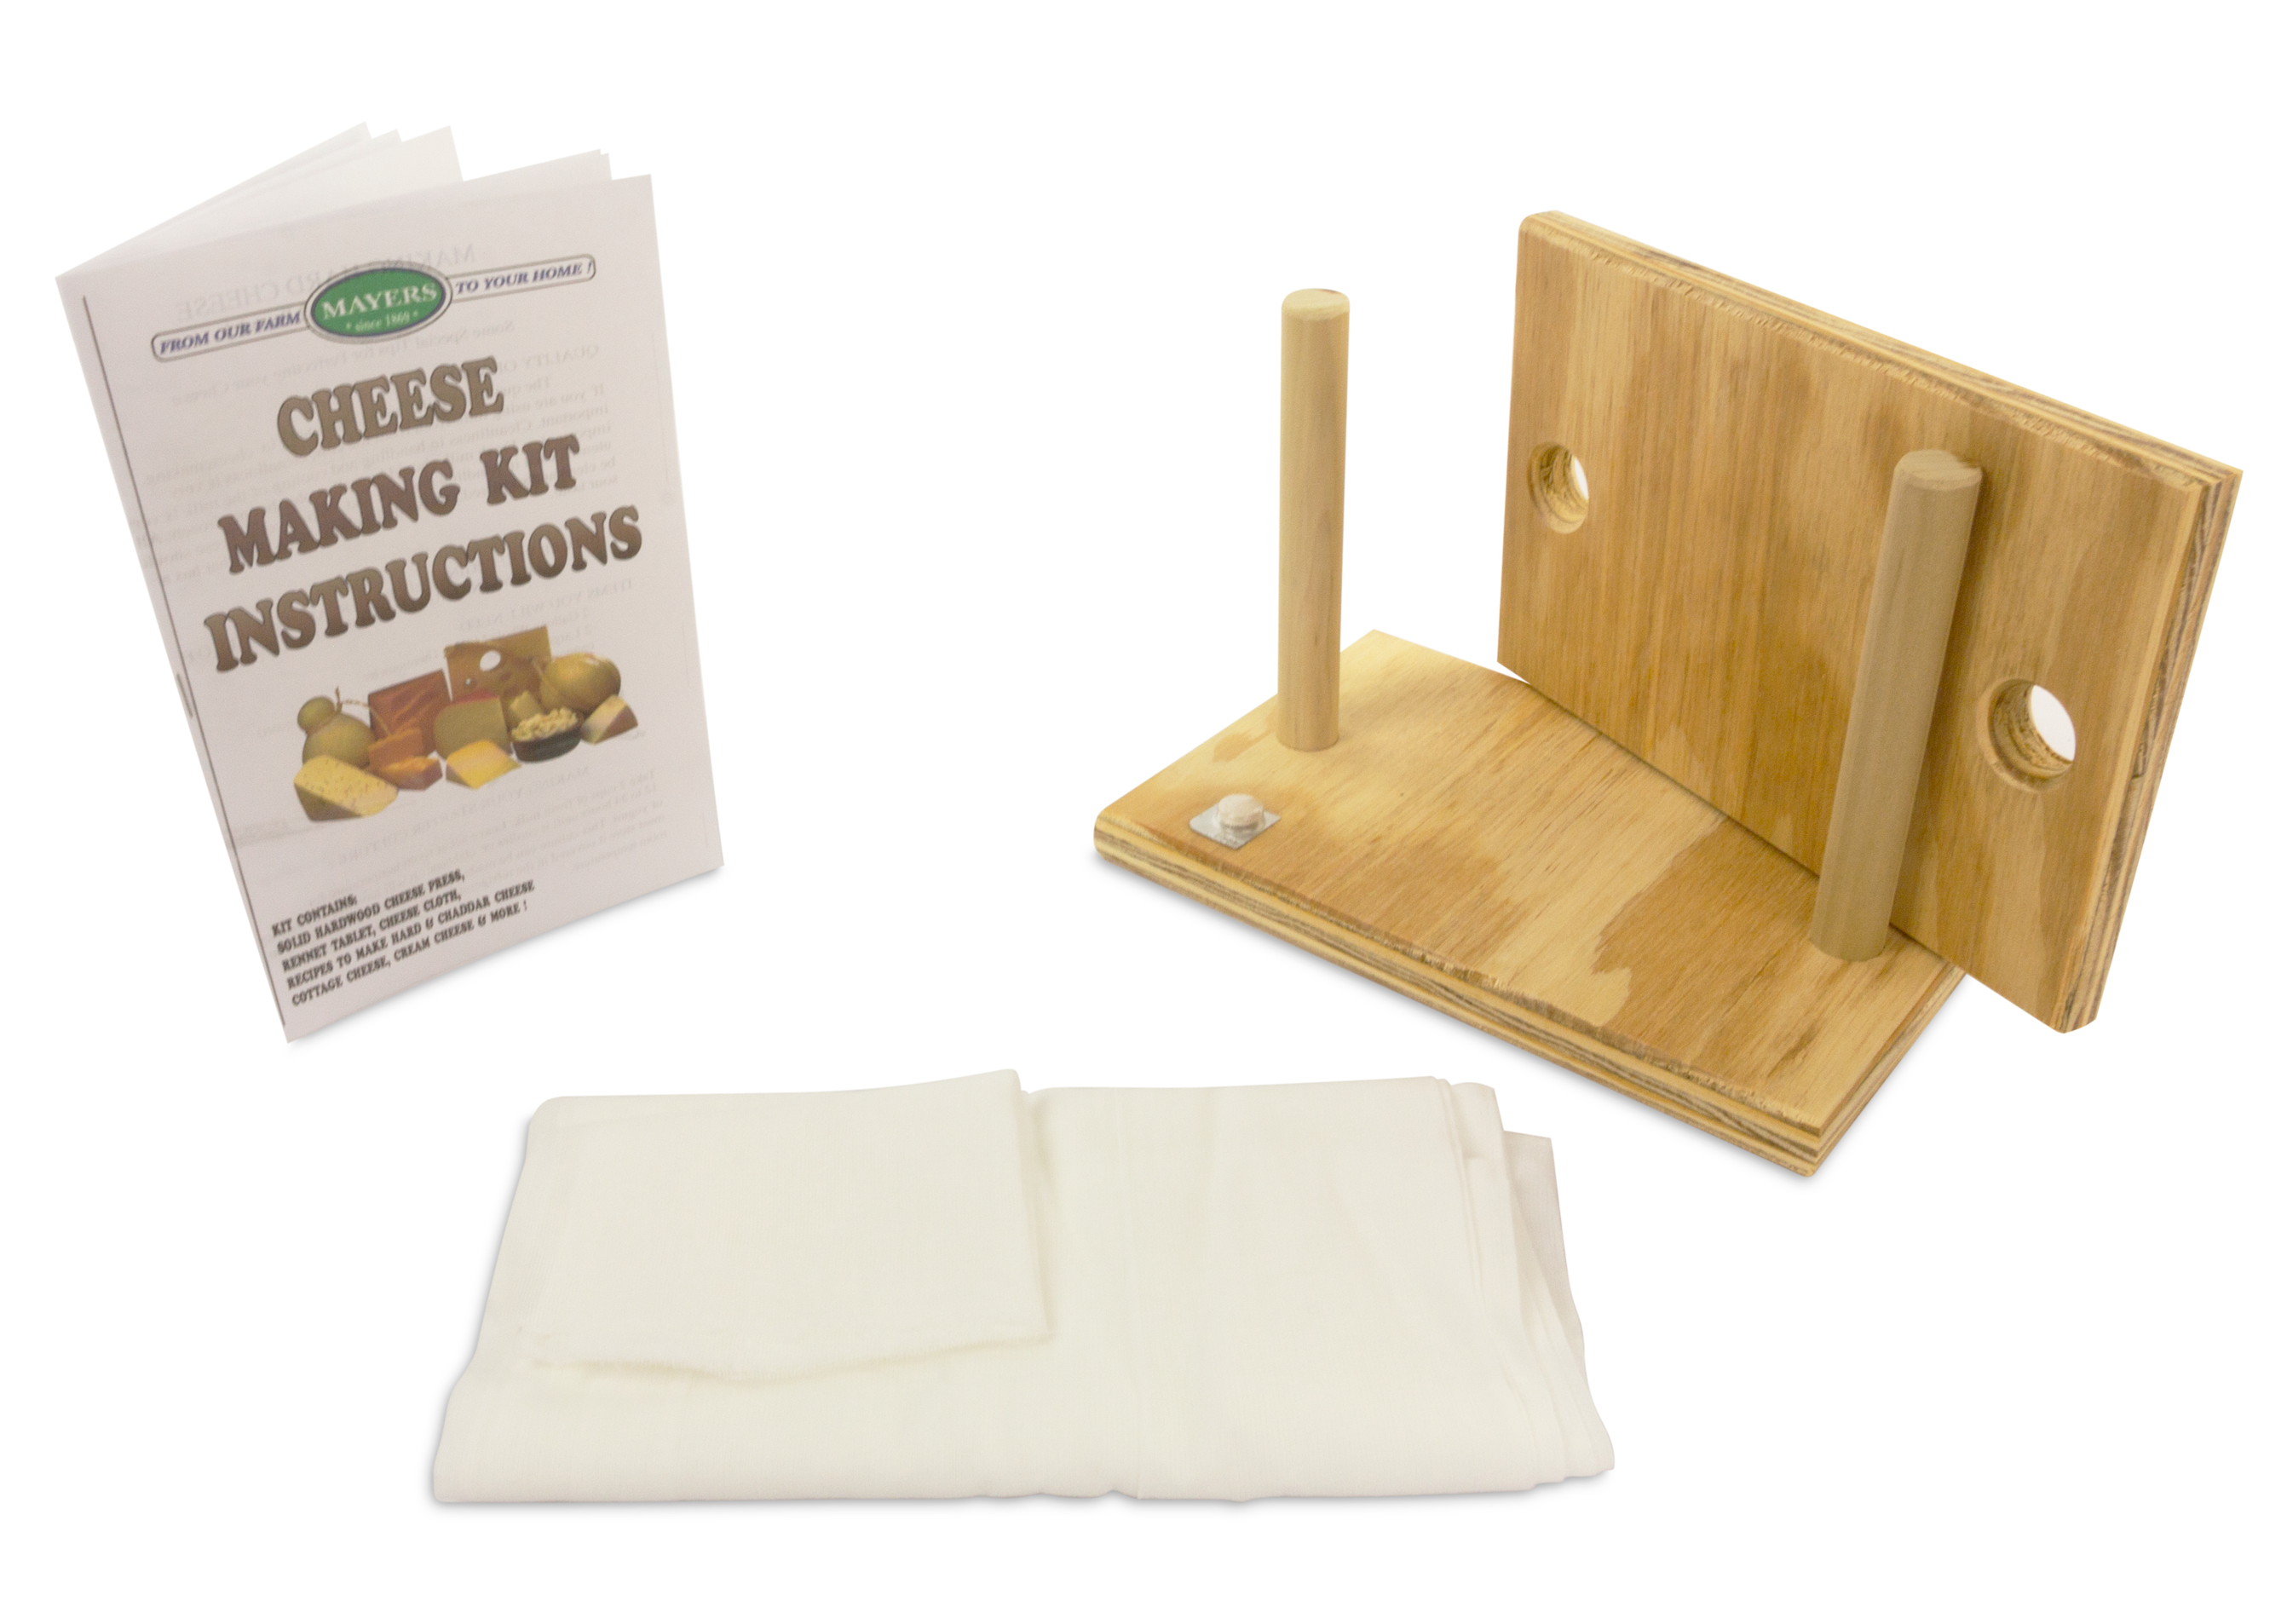 Make Your Own Cheese DIY Kit - learn how to make 6 cheese from scratch -  Grow and Make